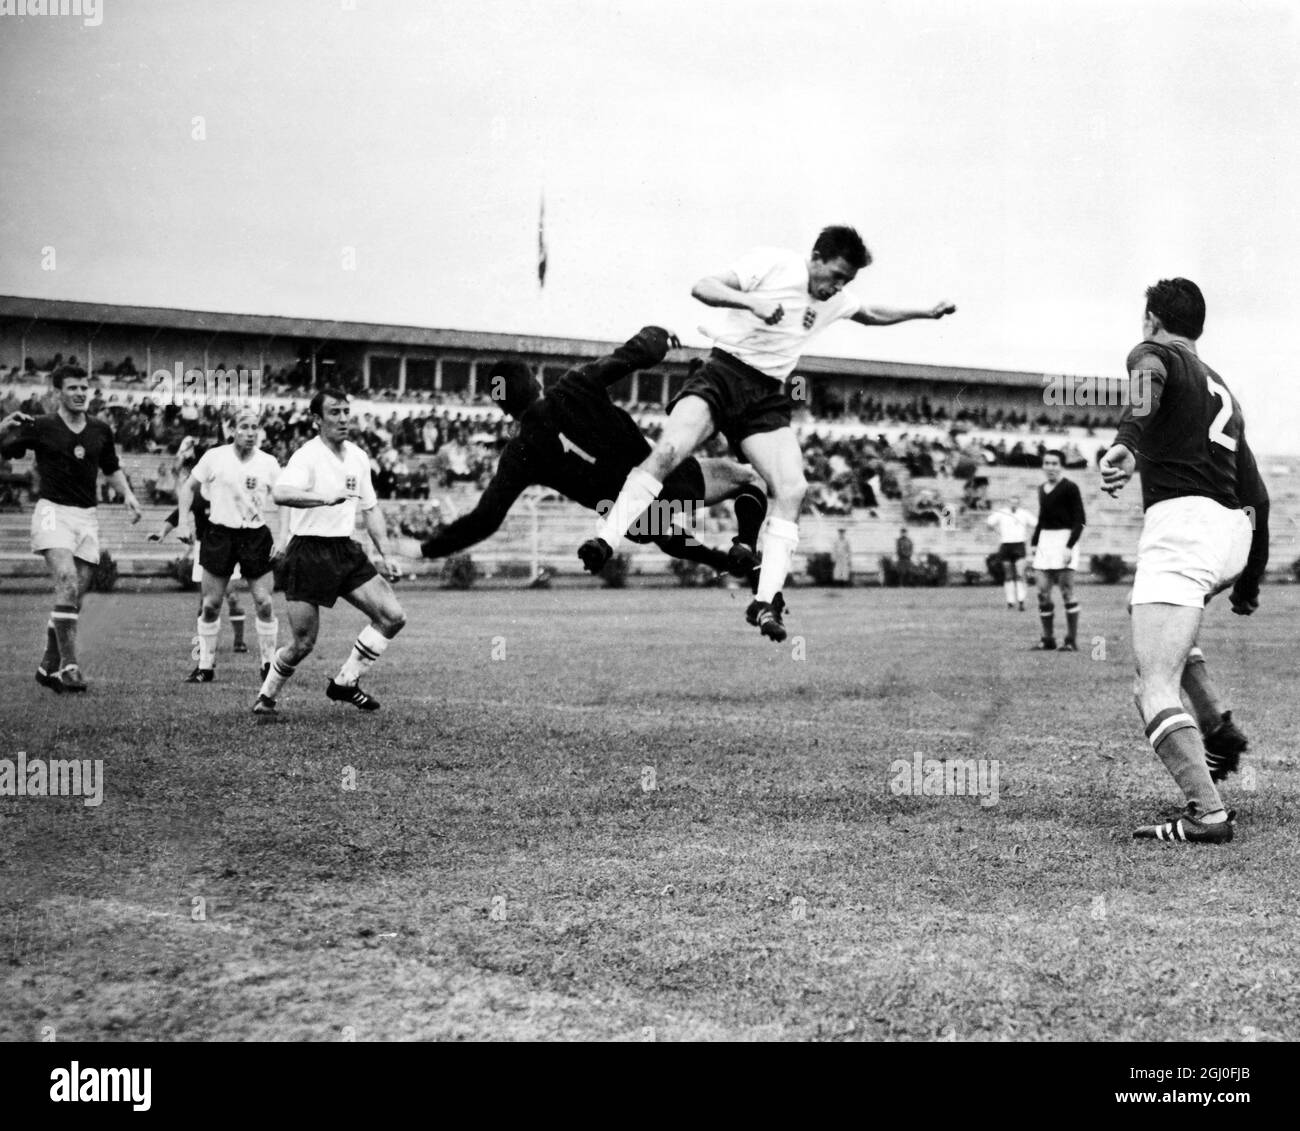 1962 World Cup England v Hungary Gerry Hitchens challenges the Hungarian goalkeeper Grosics as Jimmy Greaves and Bobby Charlton look on during the World Cup match in Rancagua, Chile. Hungary won the match 2-1. 31st May 1962. Stock Photo